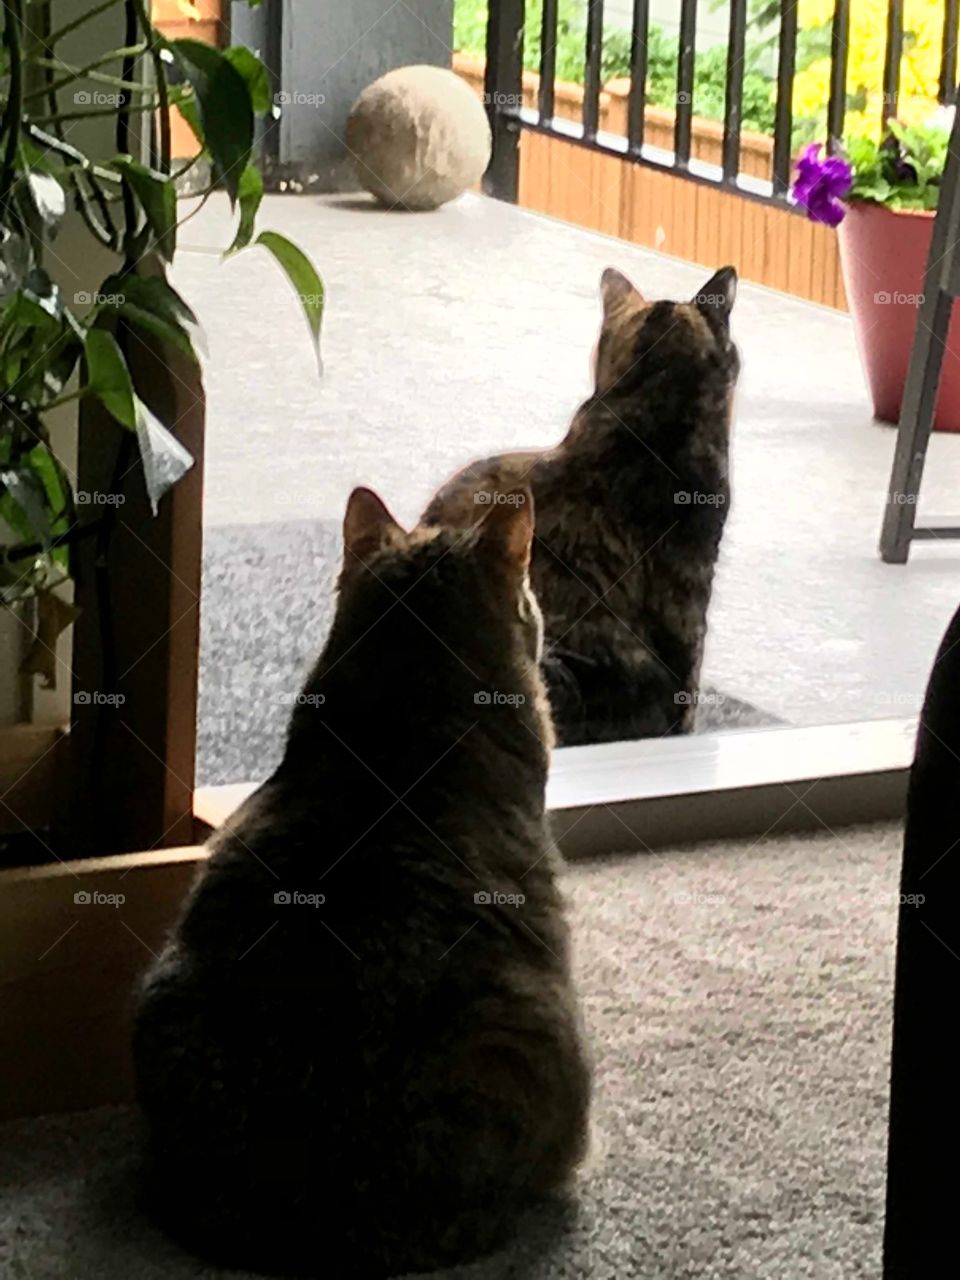 Dori and Mitzi on bird watch from the deck on a rainy Sunday afternoon on Vancouver Island.